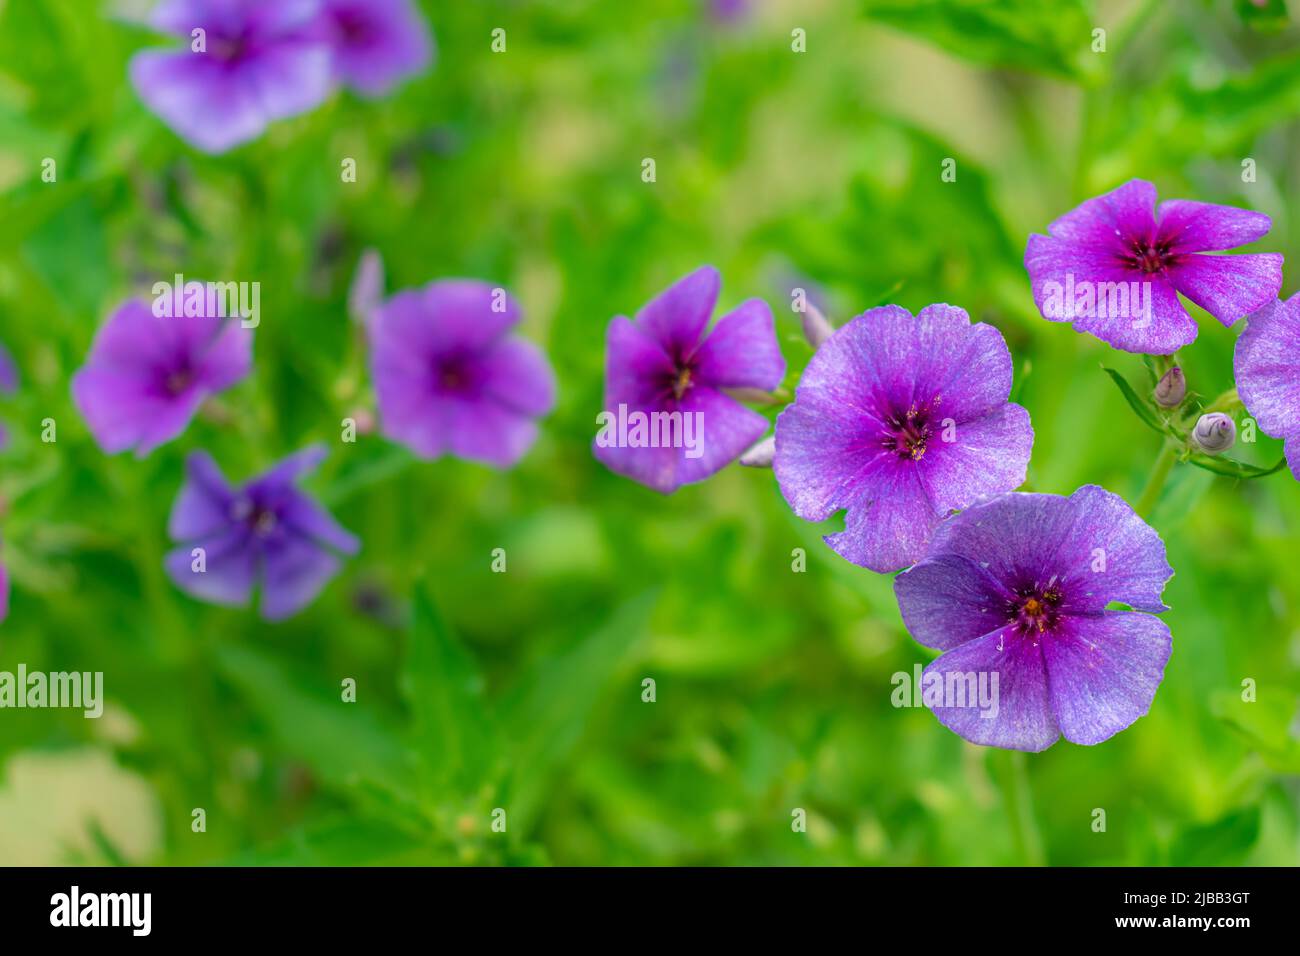 small purple flowers close-up on green background Stock Photo